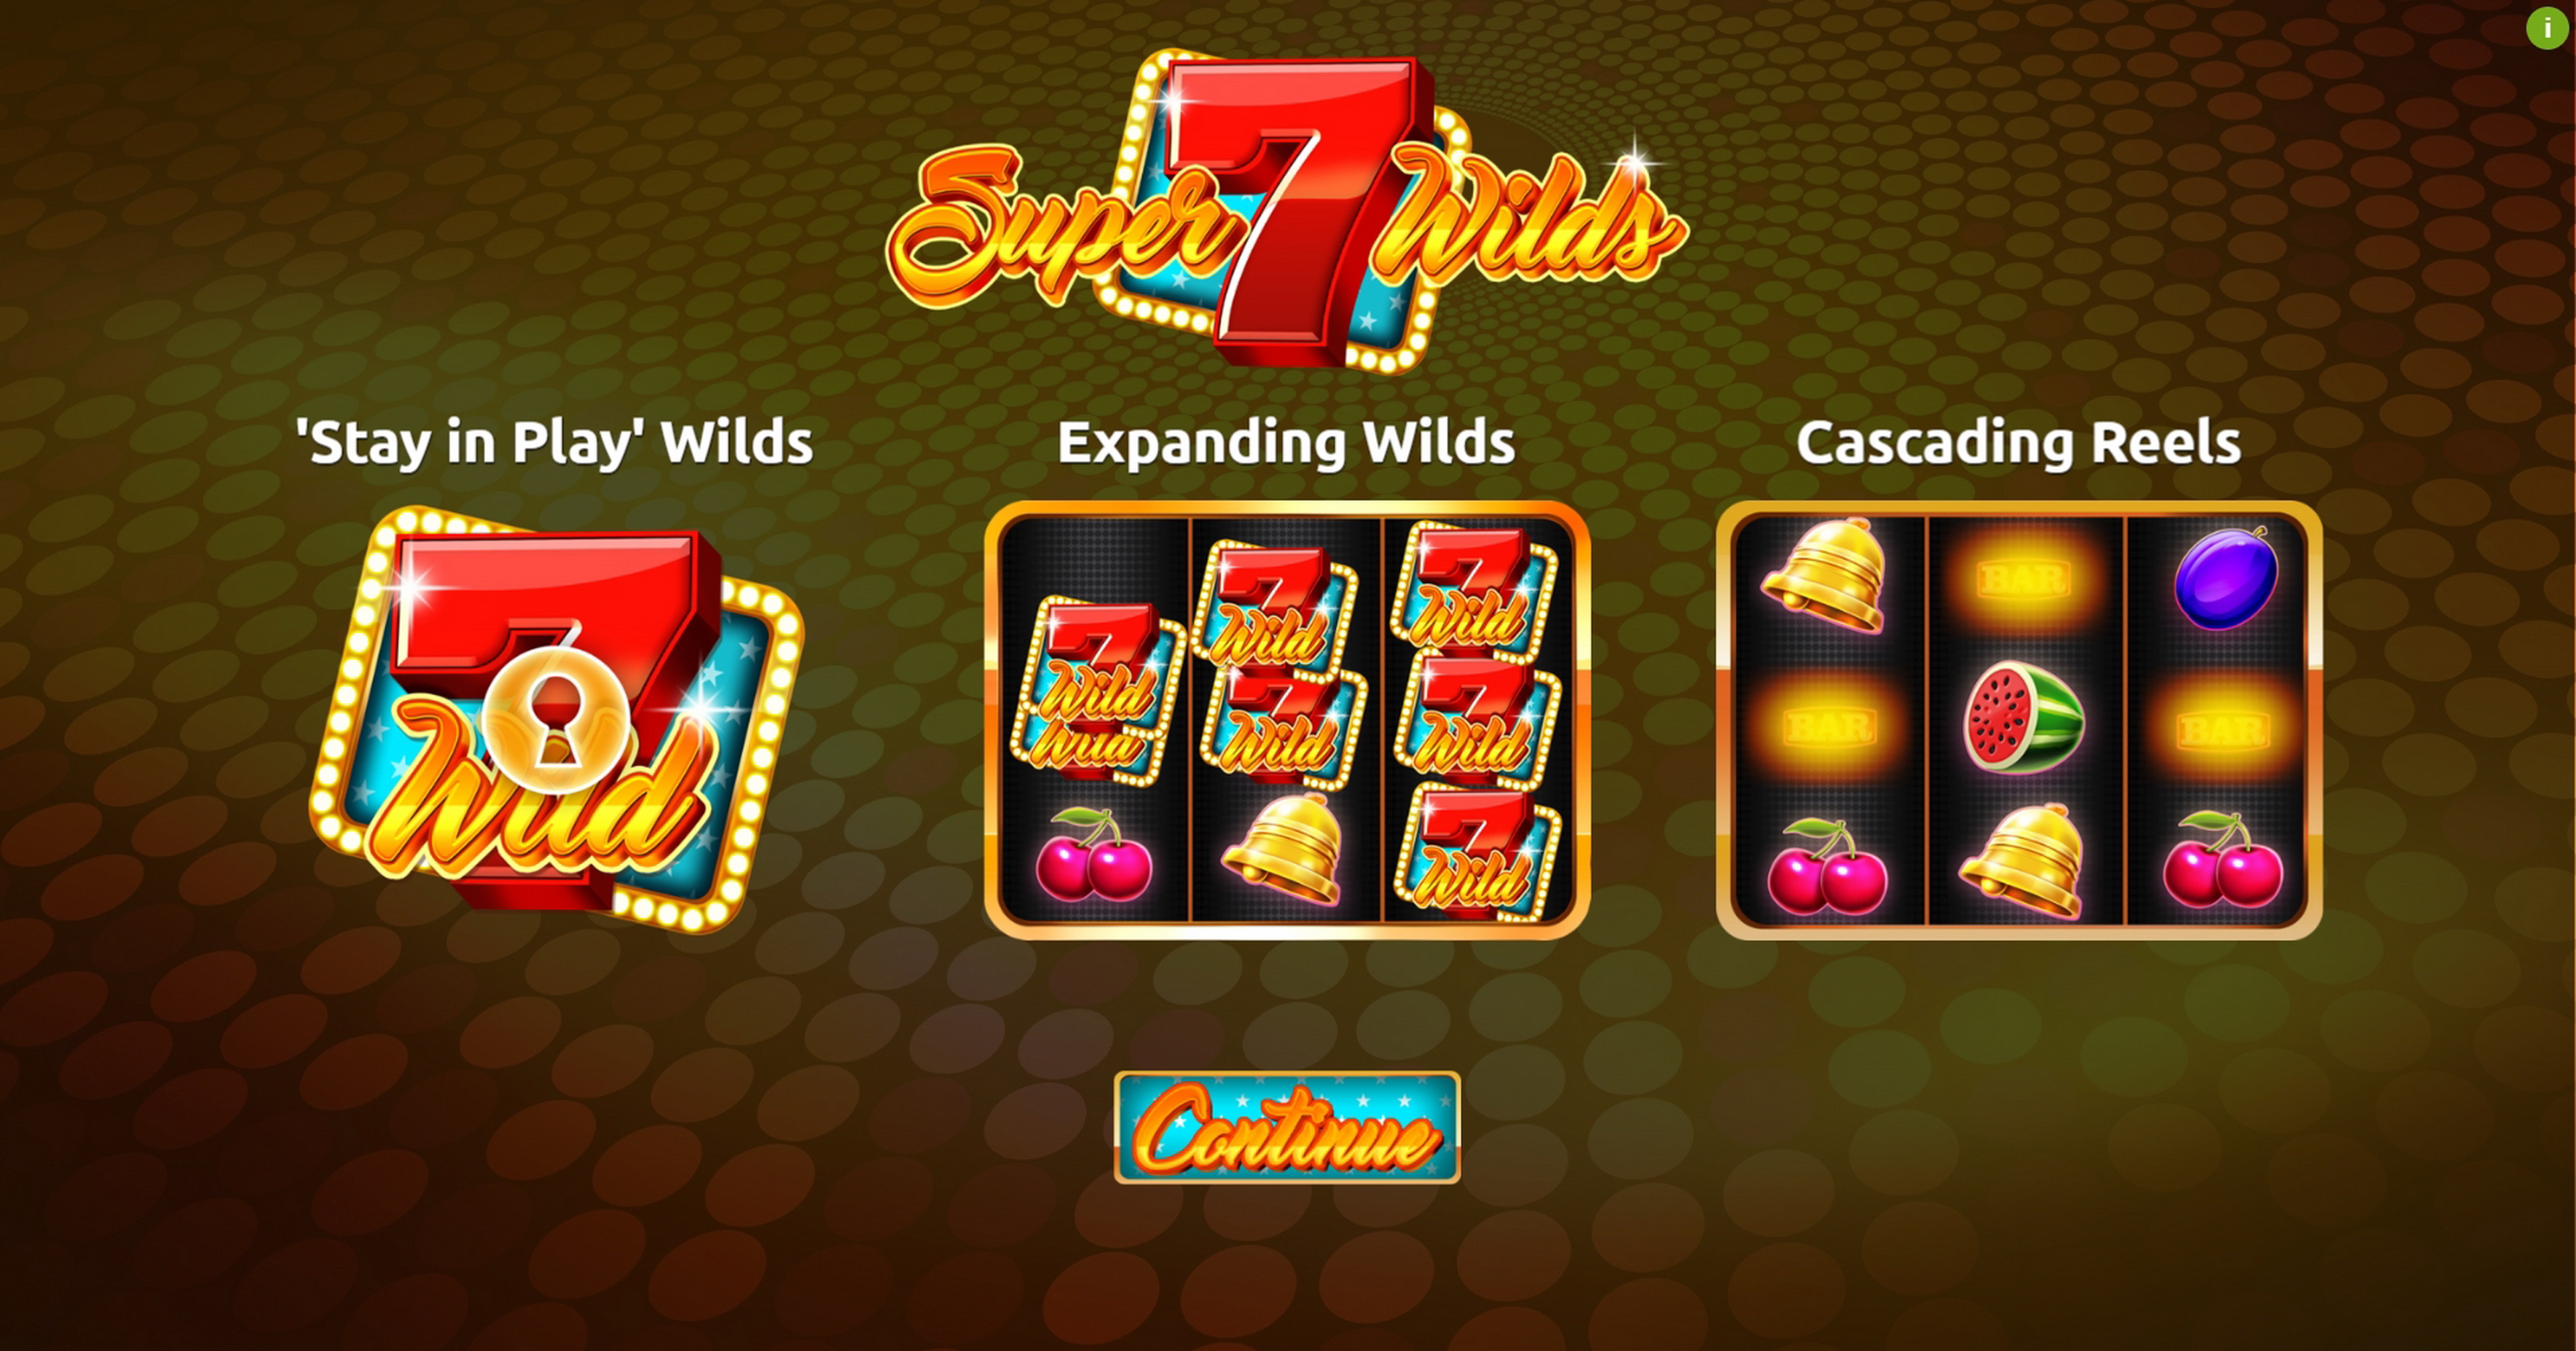 Play Super Seven Wilds Free Casino Slot Game by Cryptologic